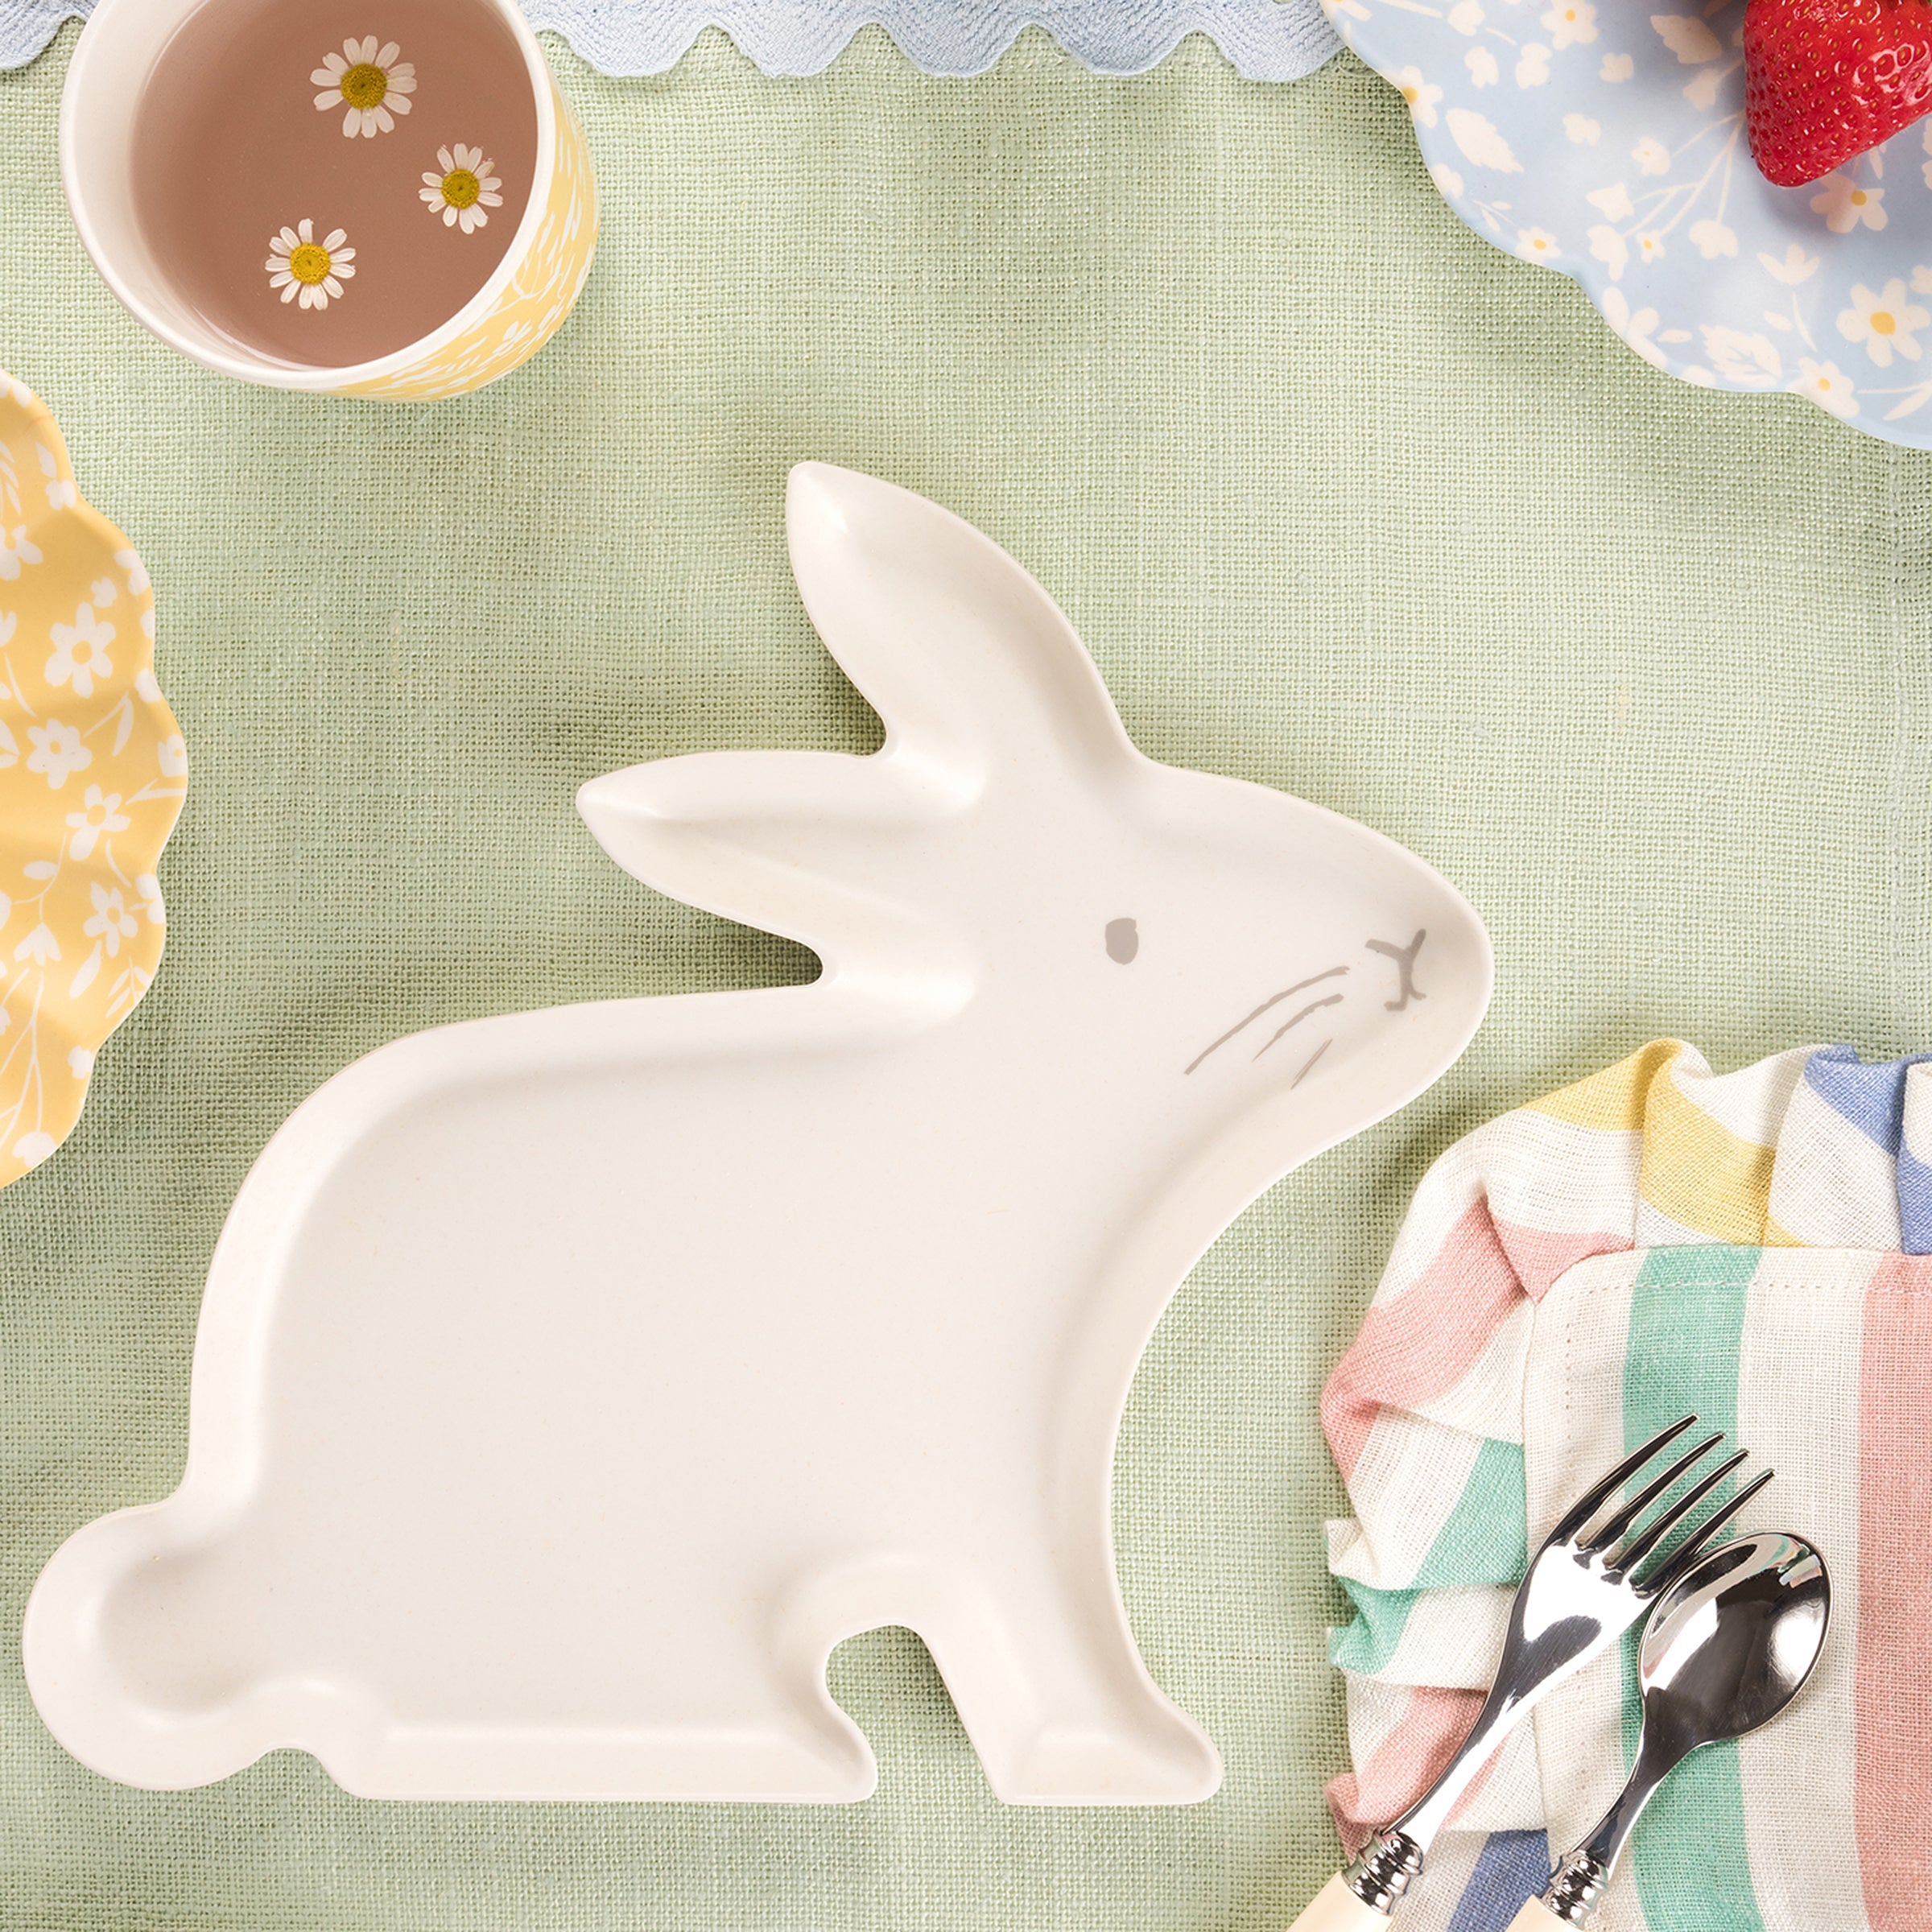 Our bunny plates are crafted from a bamboo fiber mix so are the perfect reusable plates for parties.